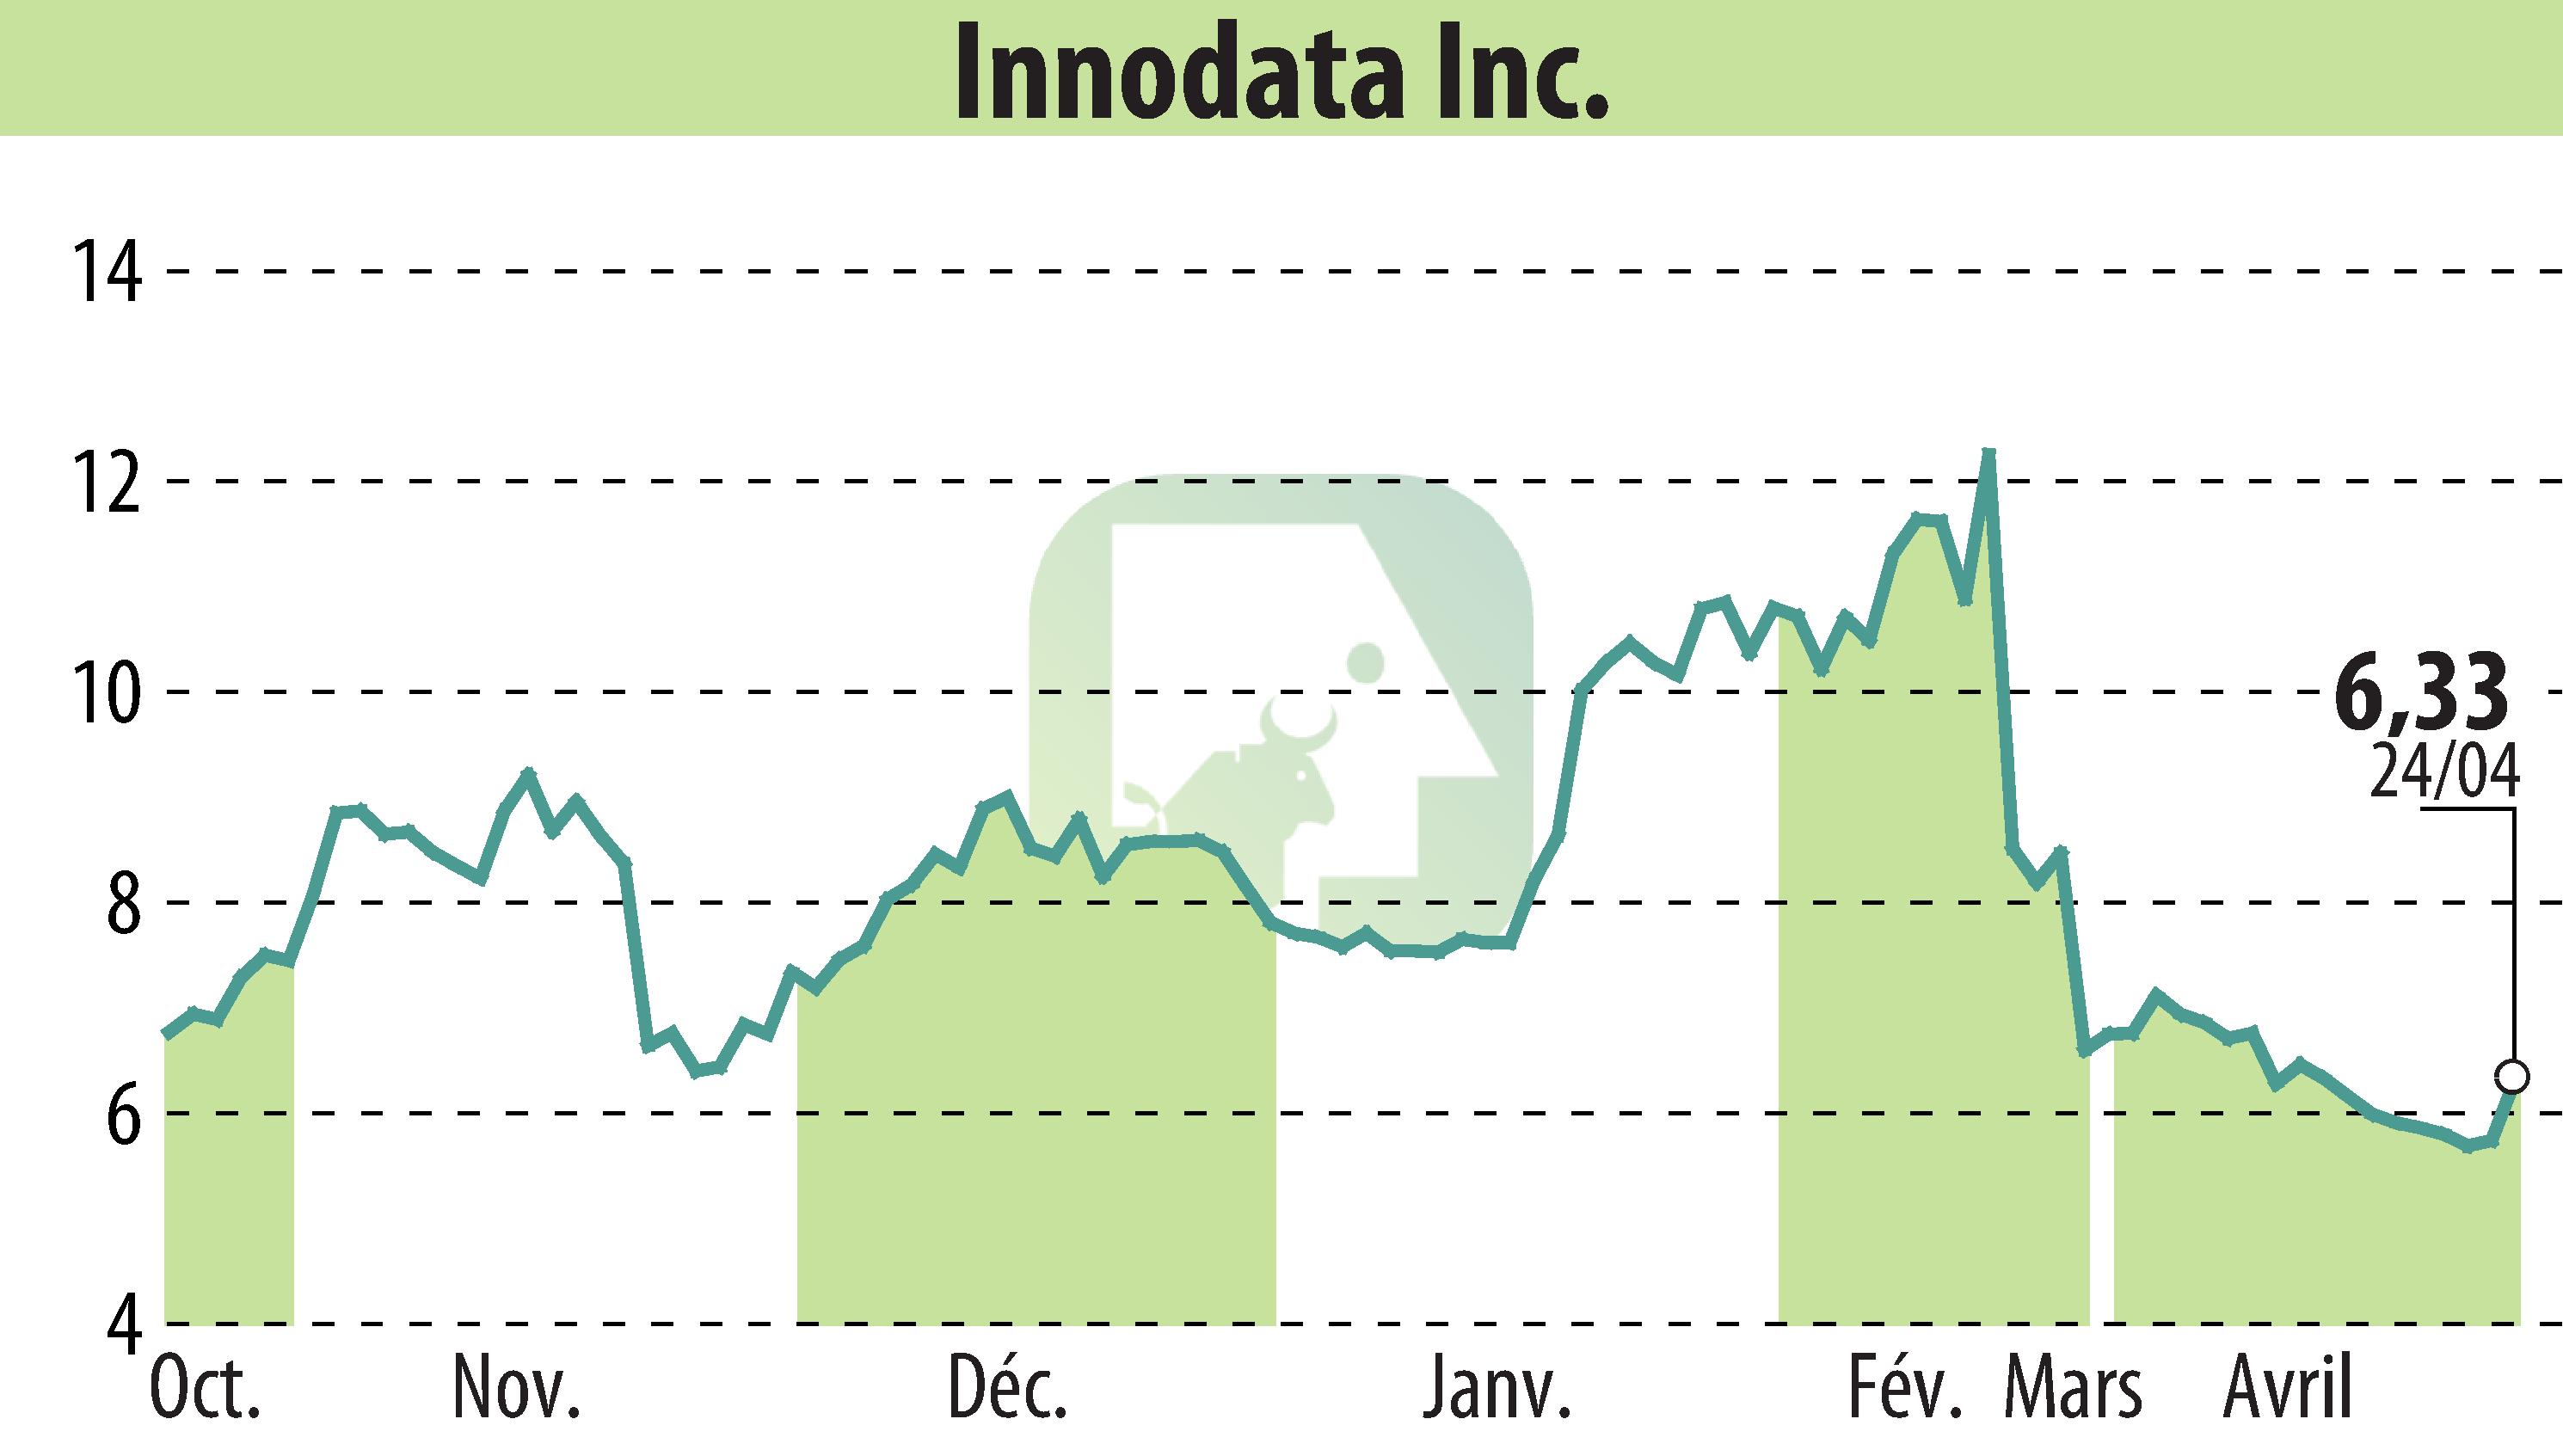 Stock price chart of Innodata Inc. (EBR:INOD) showing fluctuations.